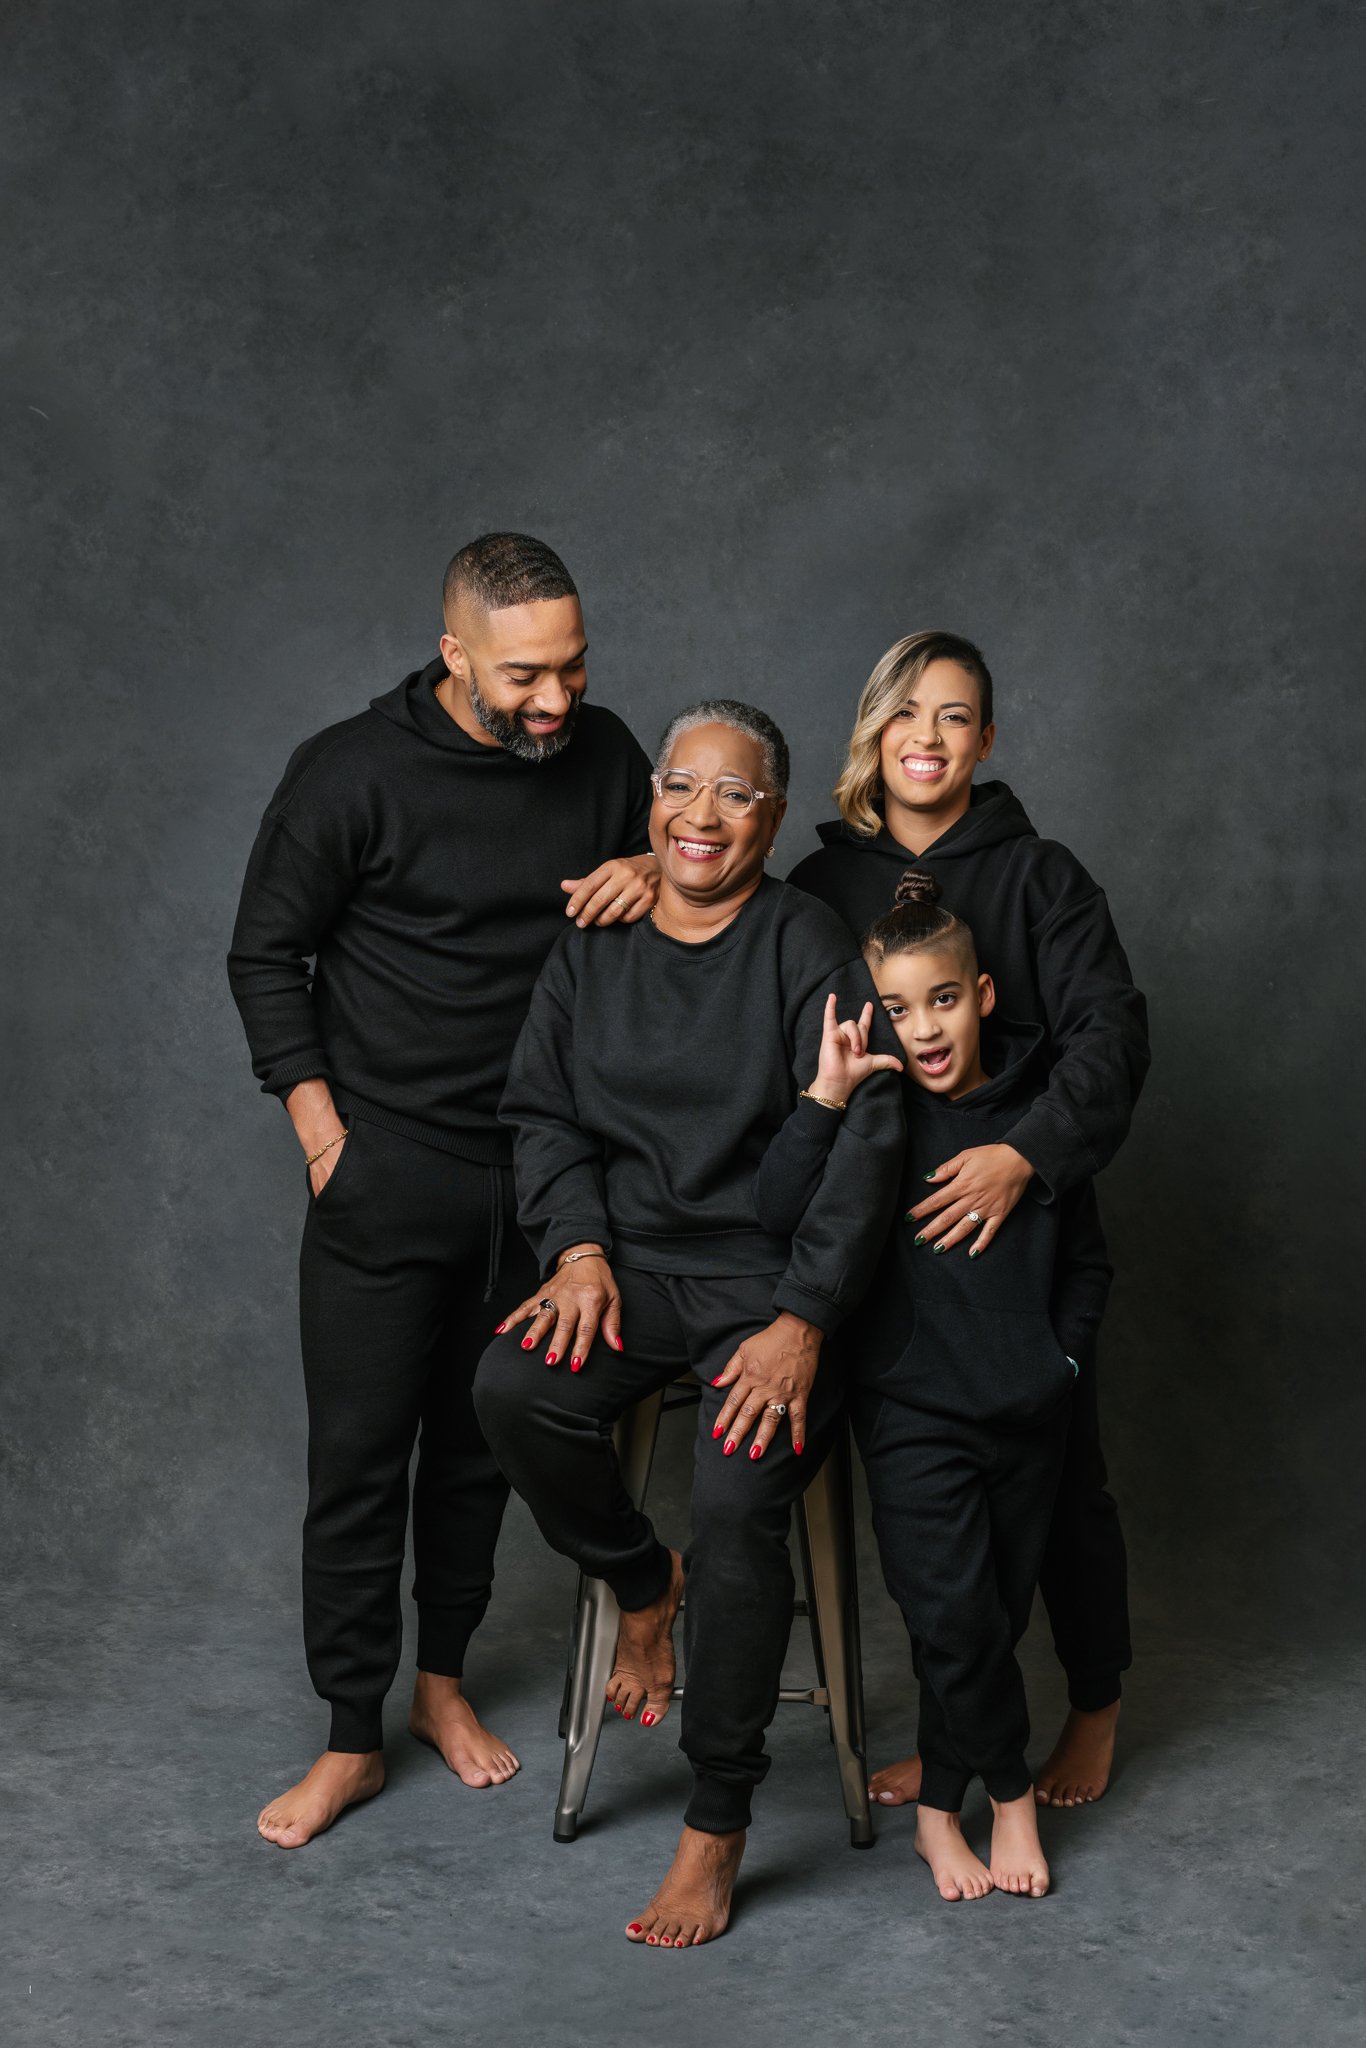  All-black family portrait taken at a studio in New Jersey by Nicole Hawkins Photography. black studio portraits #NicoleHawkinsPhotograaphy #NicoleHawkinsFamilies #Modernfamilypictures #studioportraits #matchingfamilyoutfits #NJphotographer 